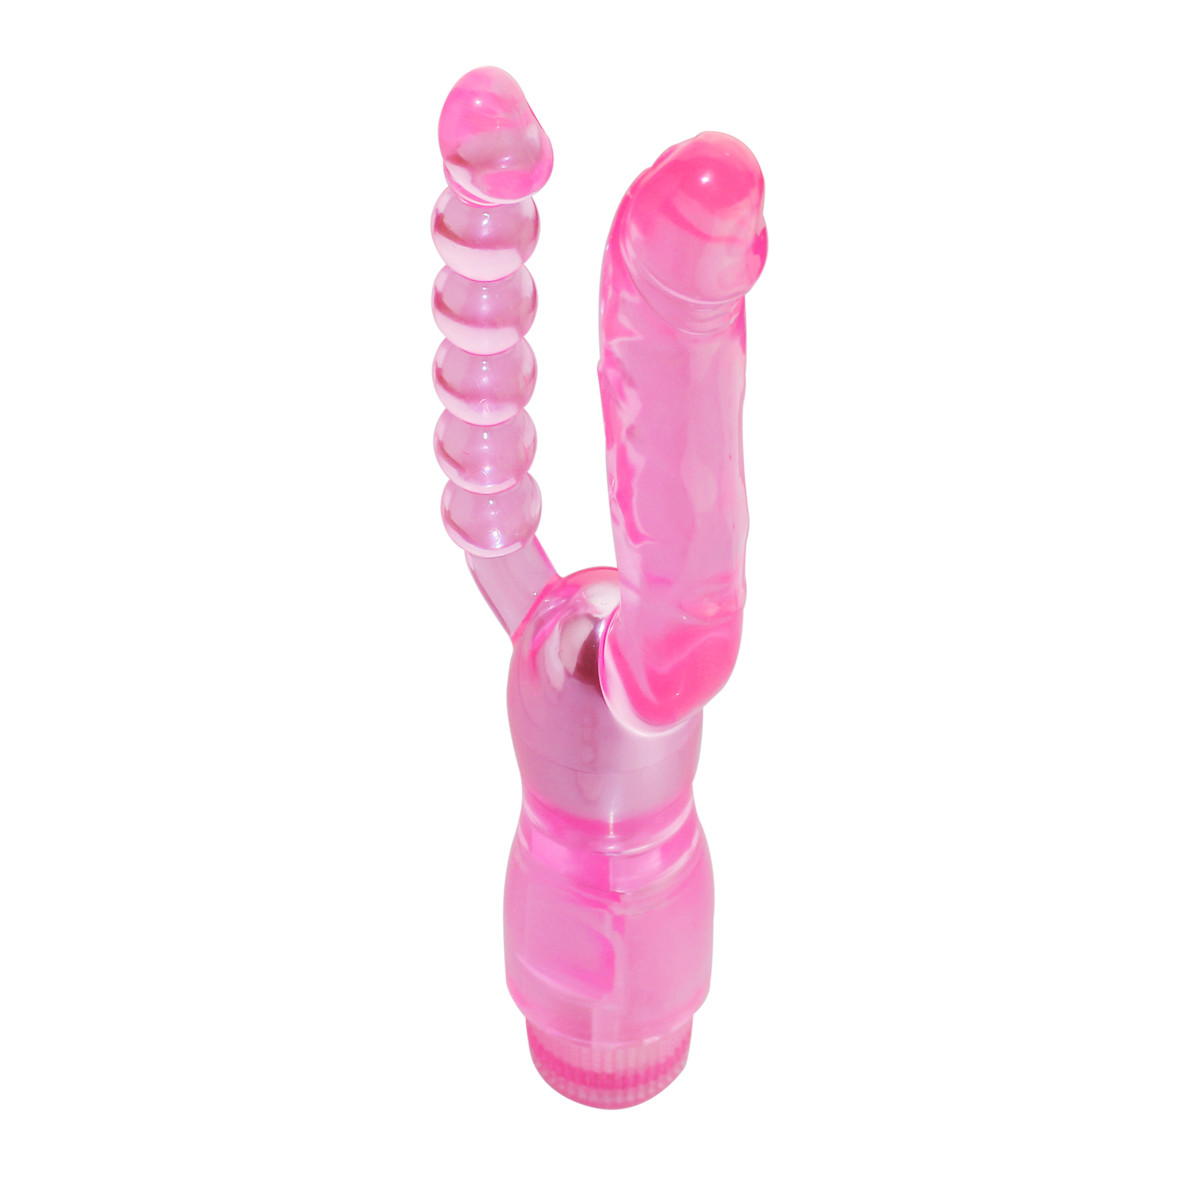 Sex Toy For Vibrator And  Anal plugs Dual-purpose  IFLCH001